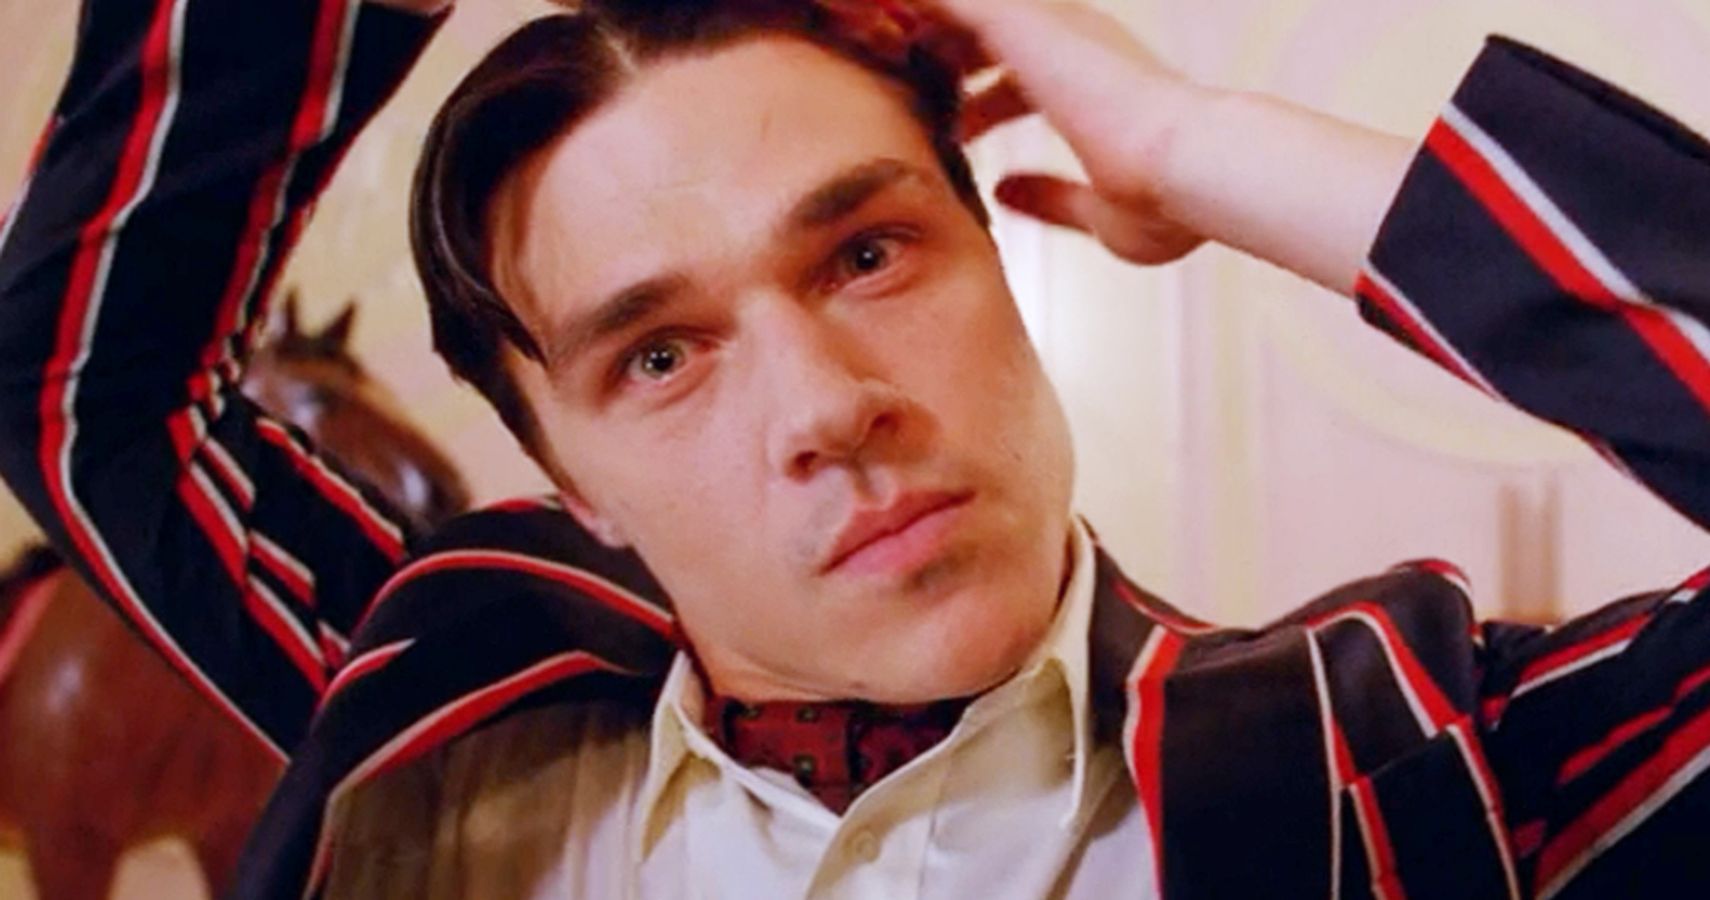 10 Things Everyone Missed About Dandy From American Horror Story Freak